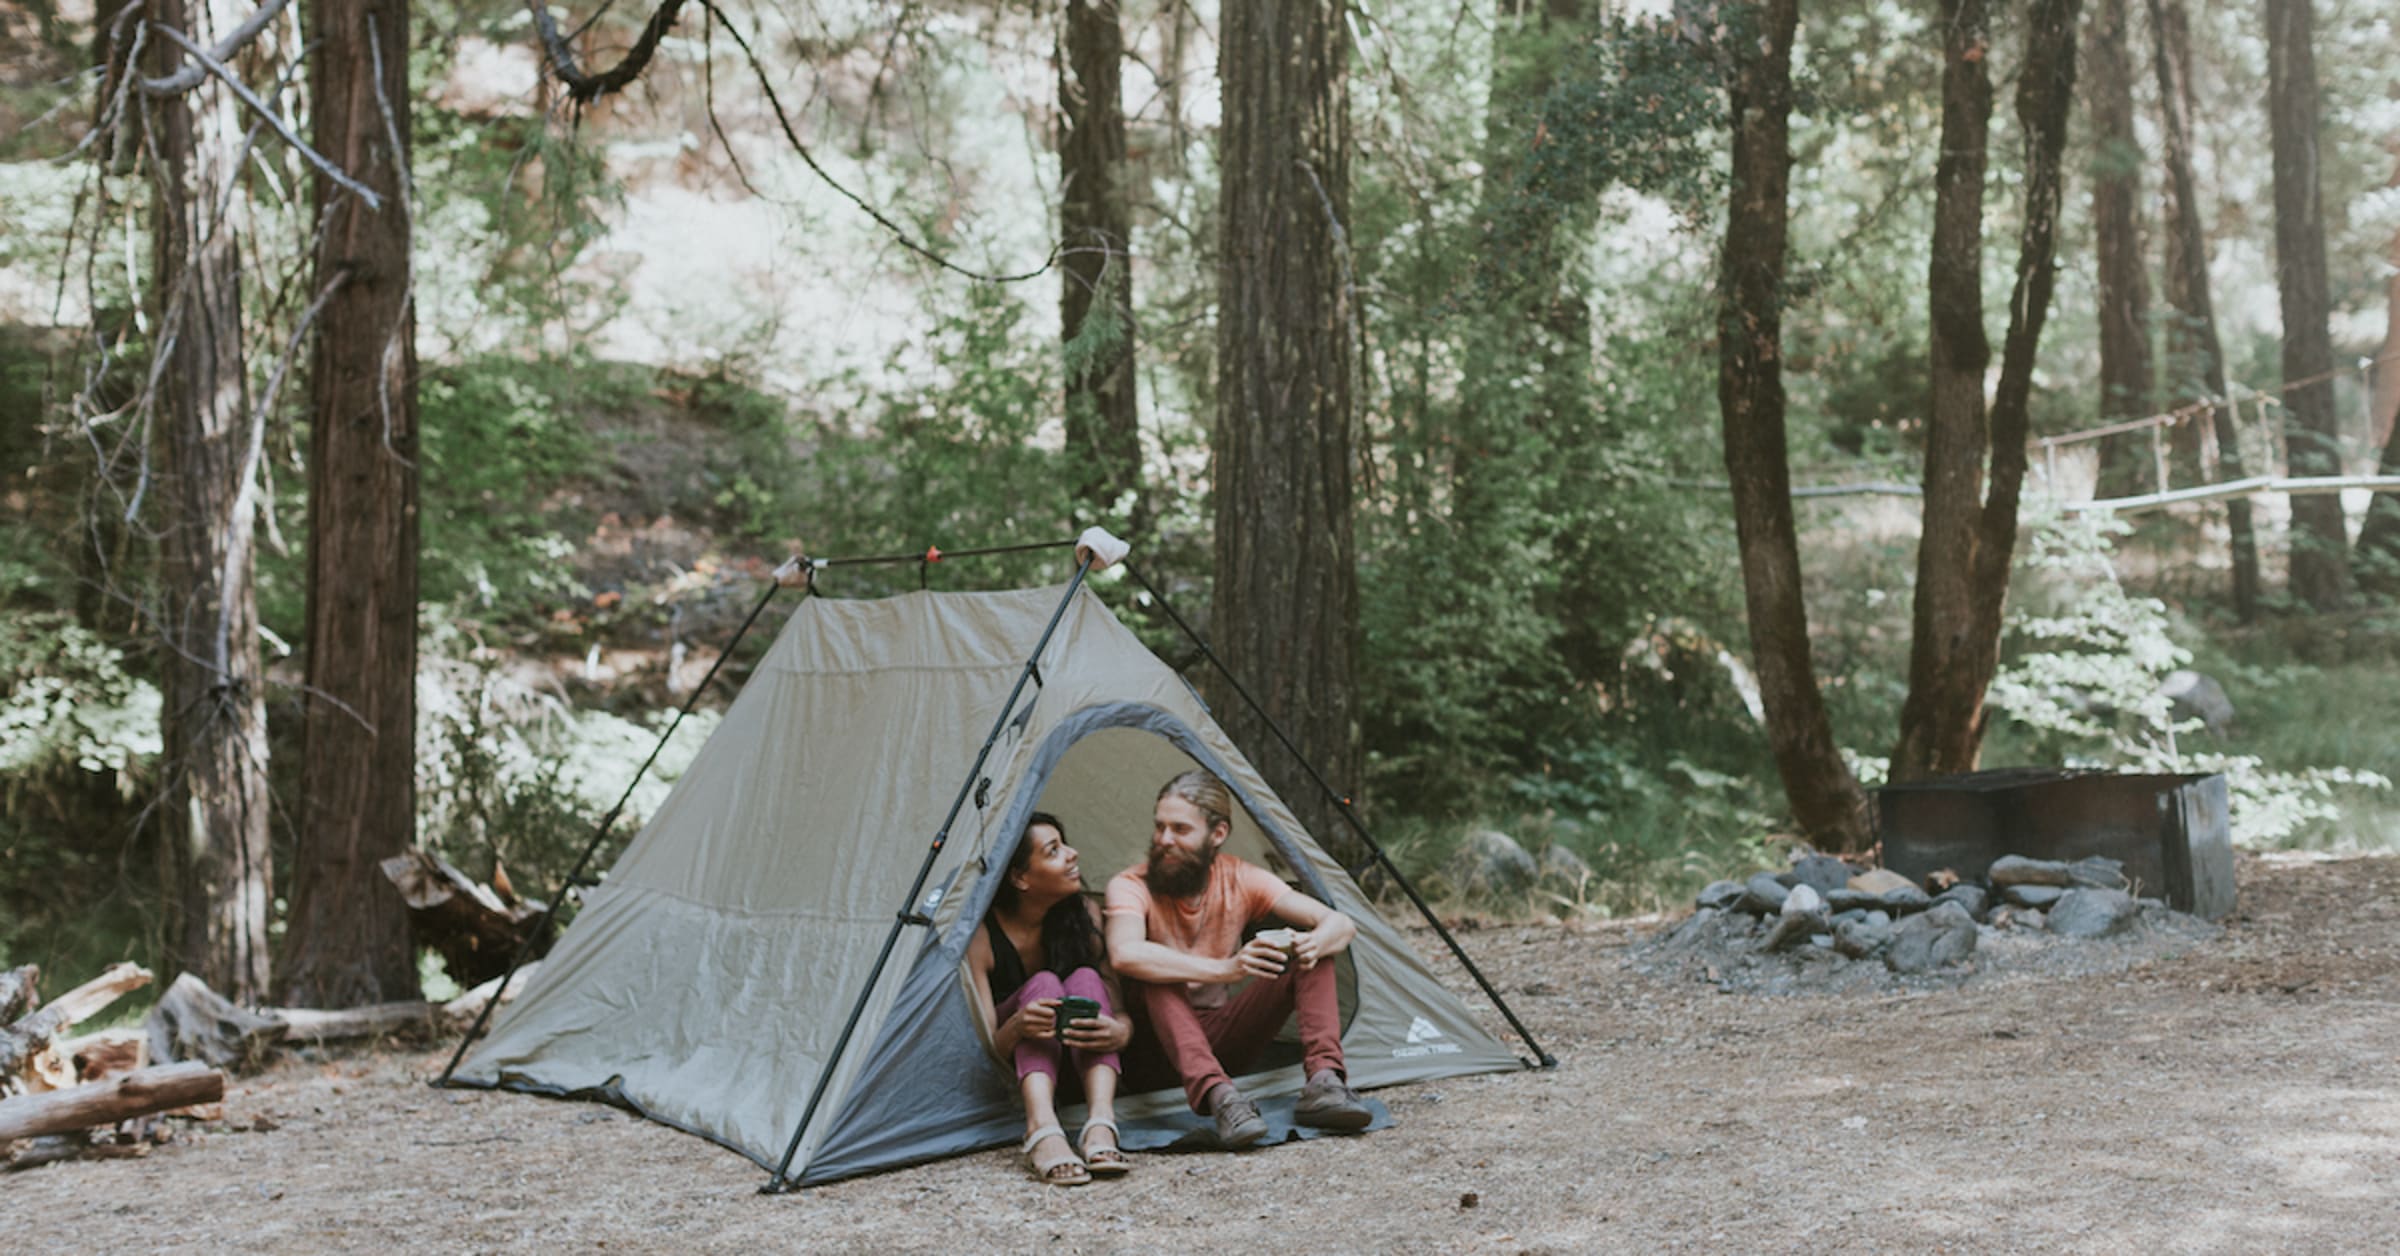 Relationship Goals: Tips and Ideas for Camping as a Couple